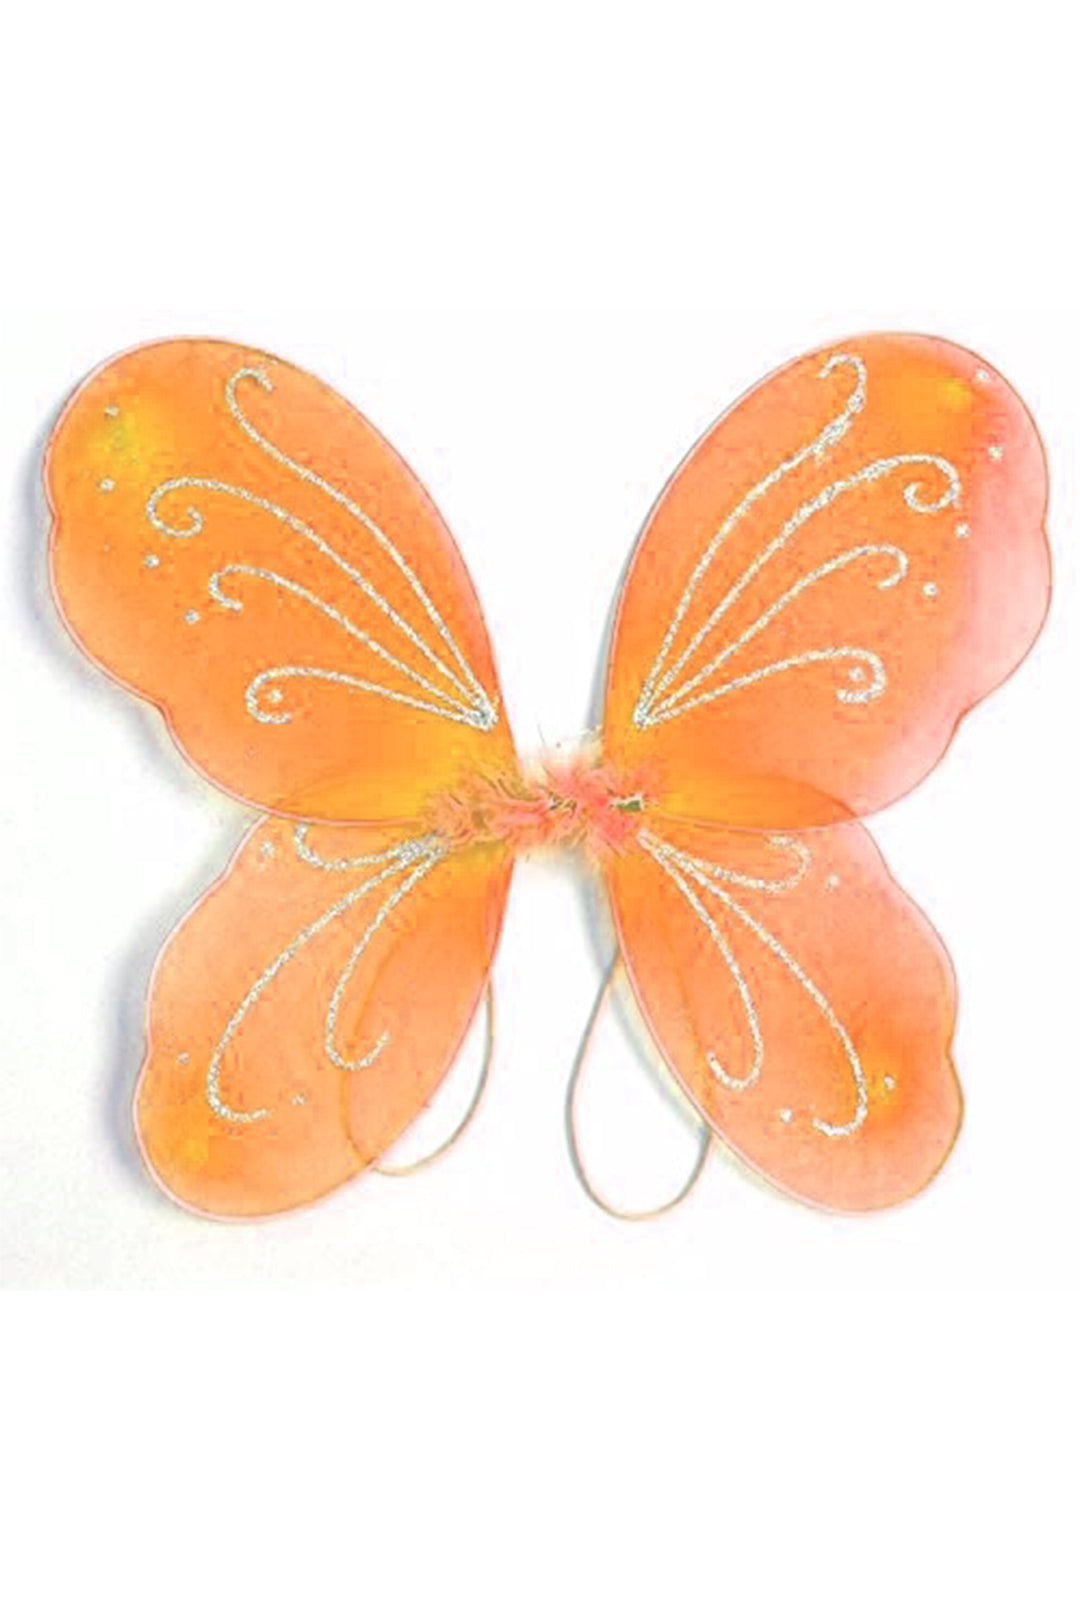 Orange Butterfly Wings Perth | Hurly-Burly